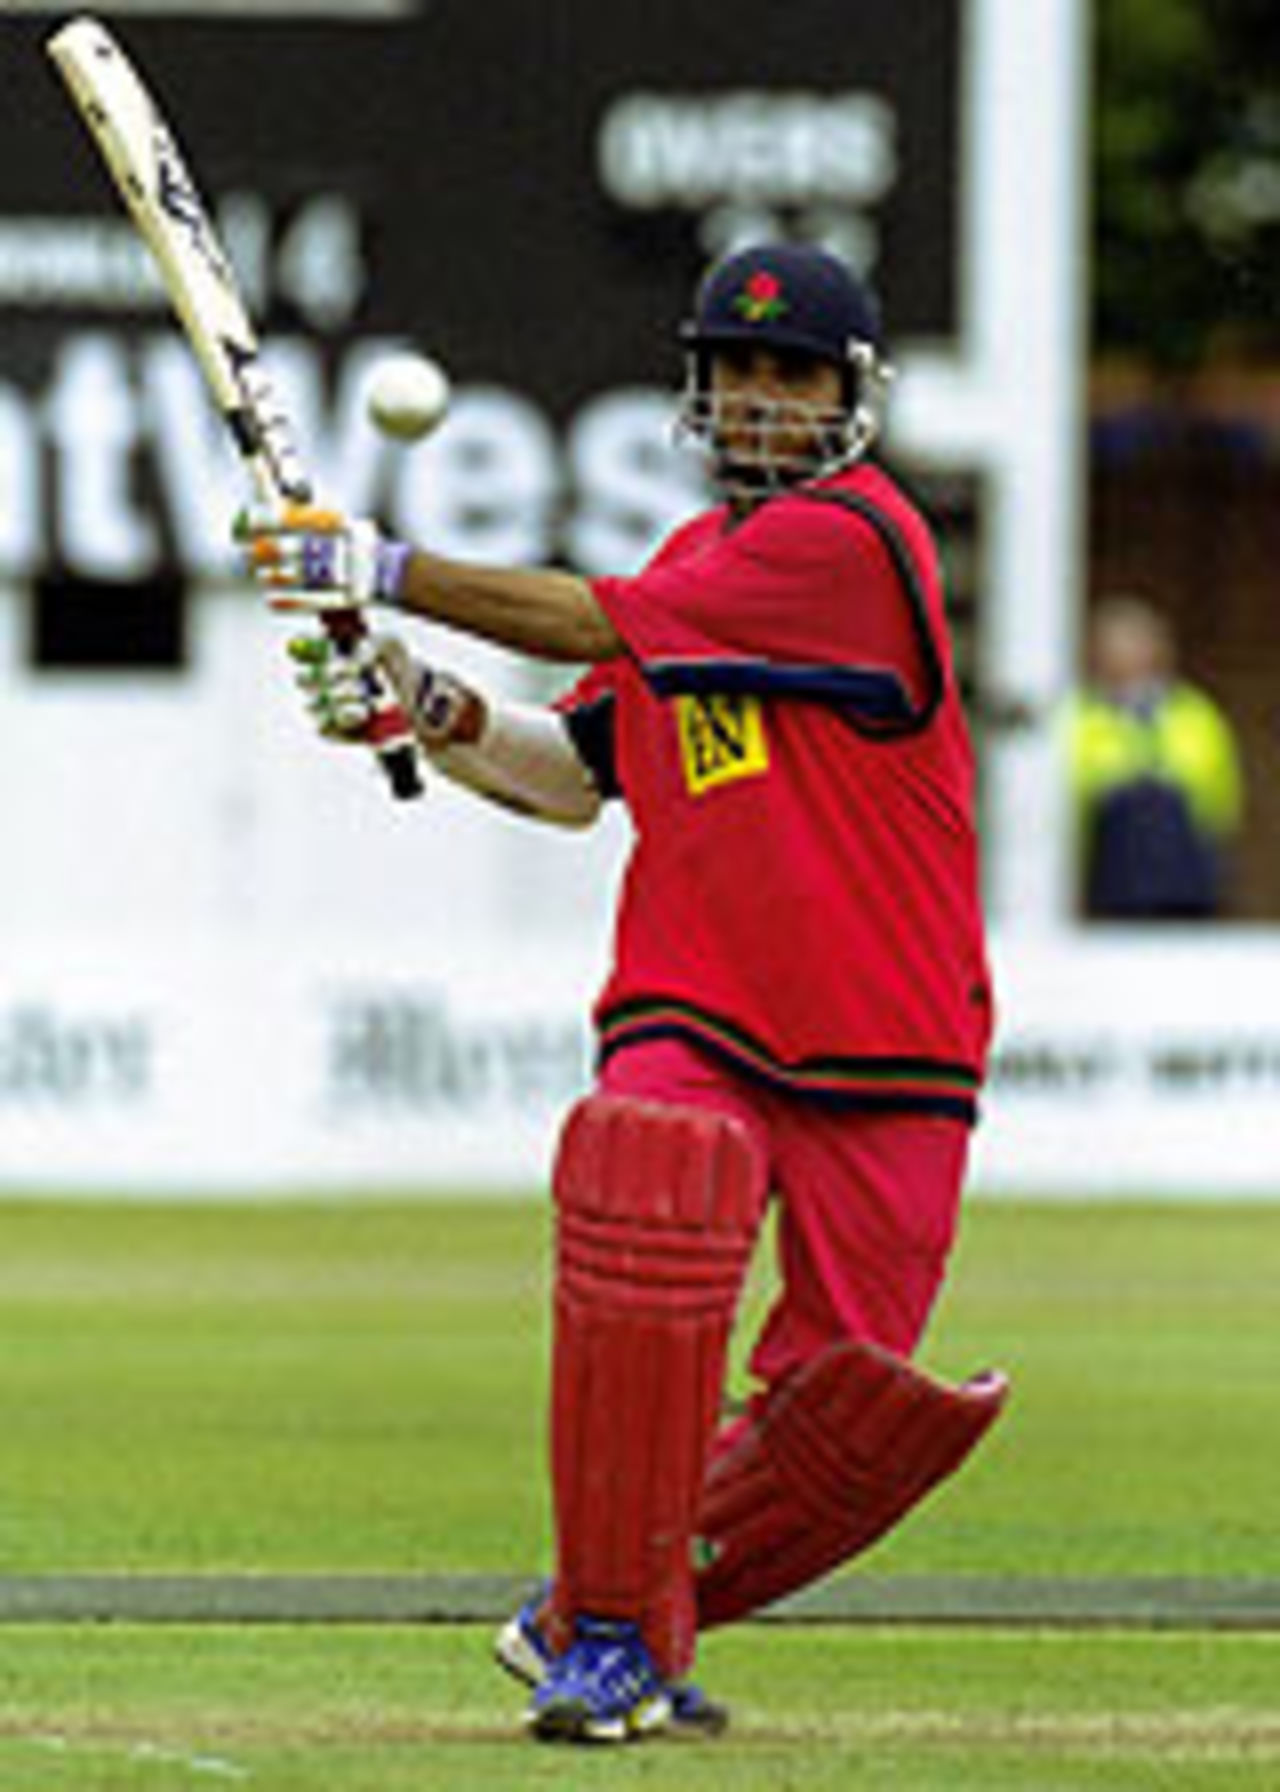 Sourav Ganguly bats for Lancashire during his disappointing county season in 2000, Old Trafford